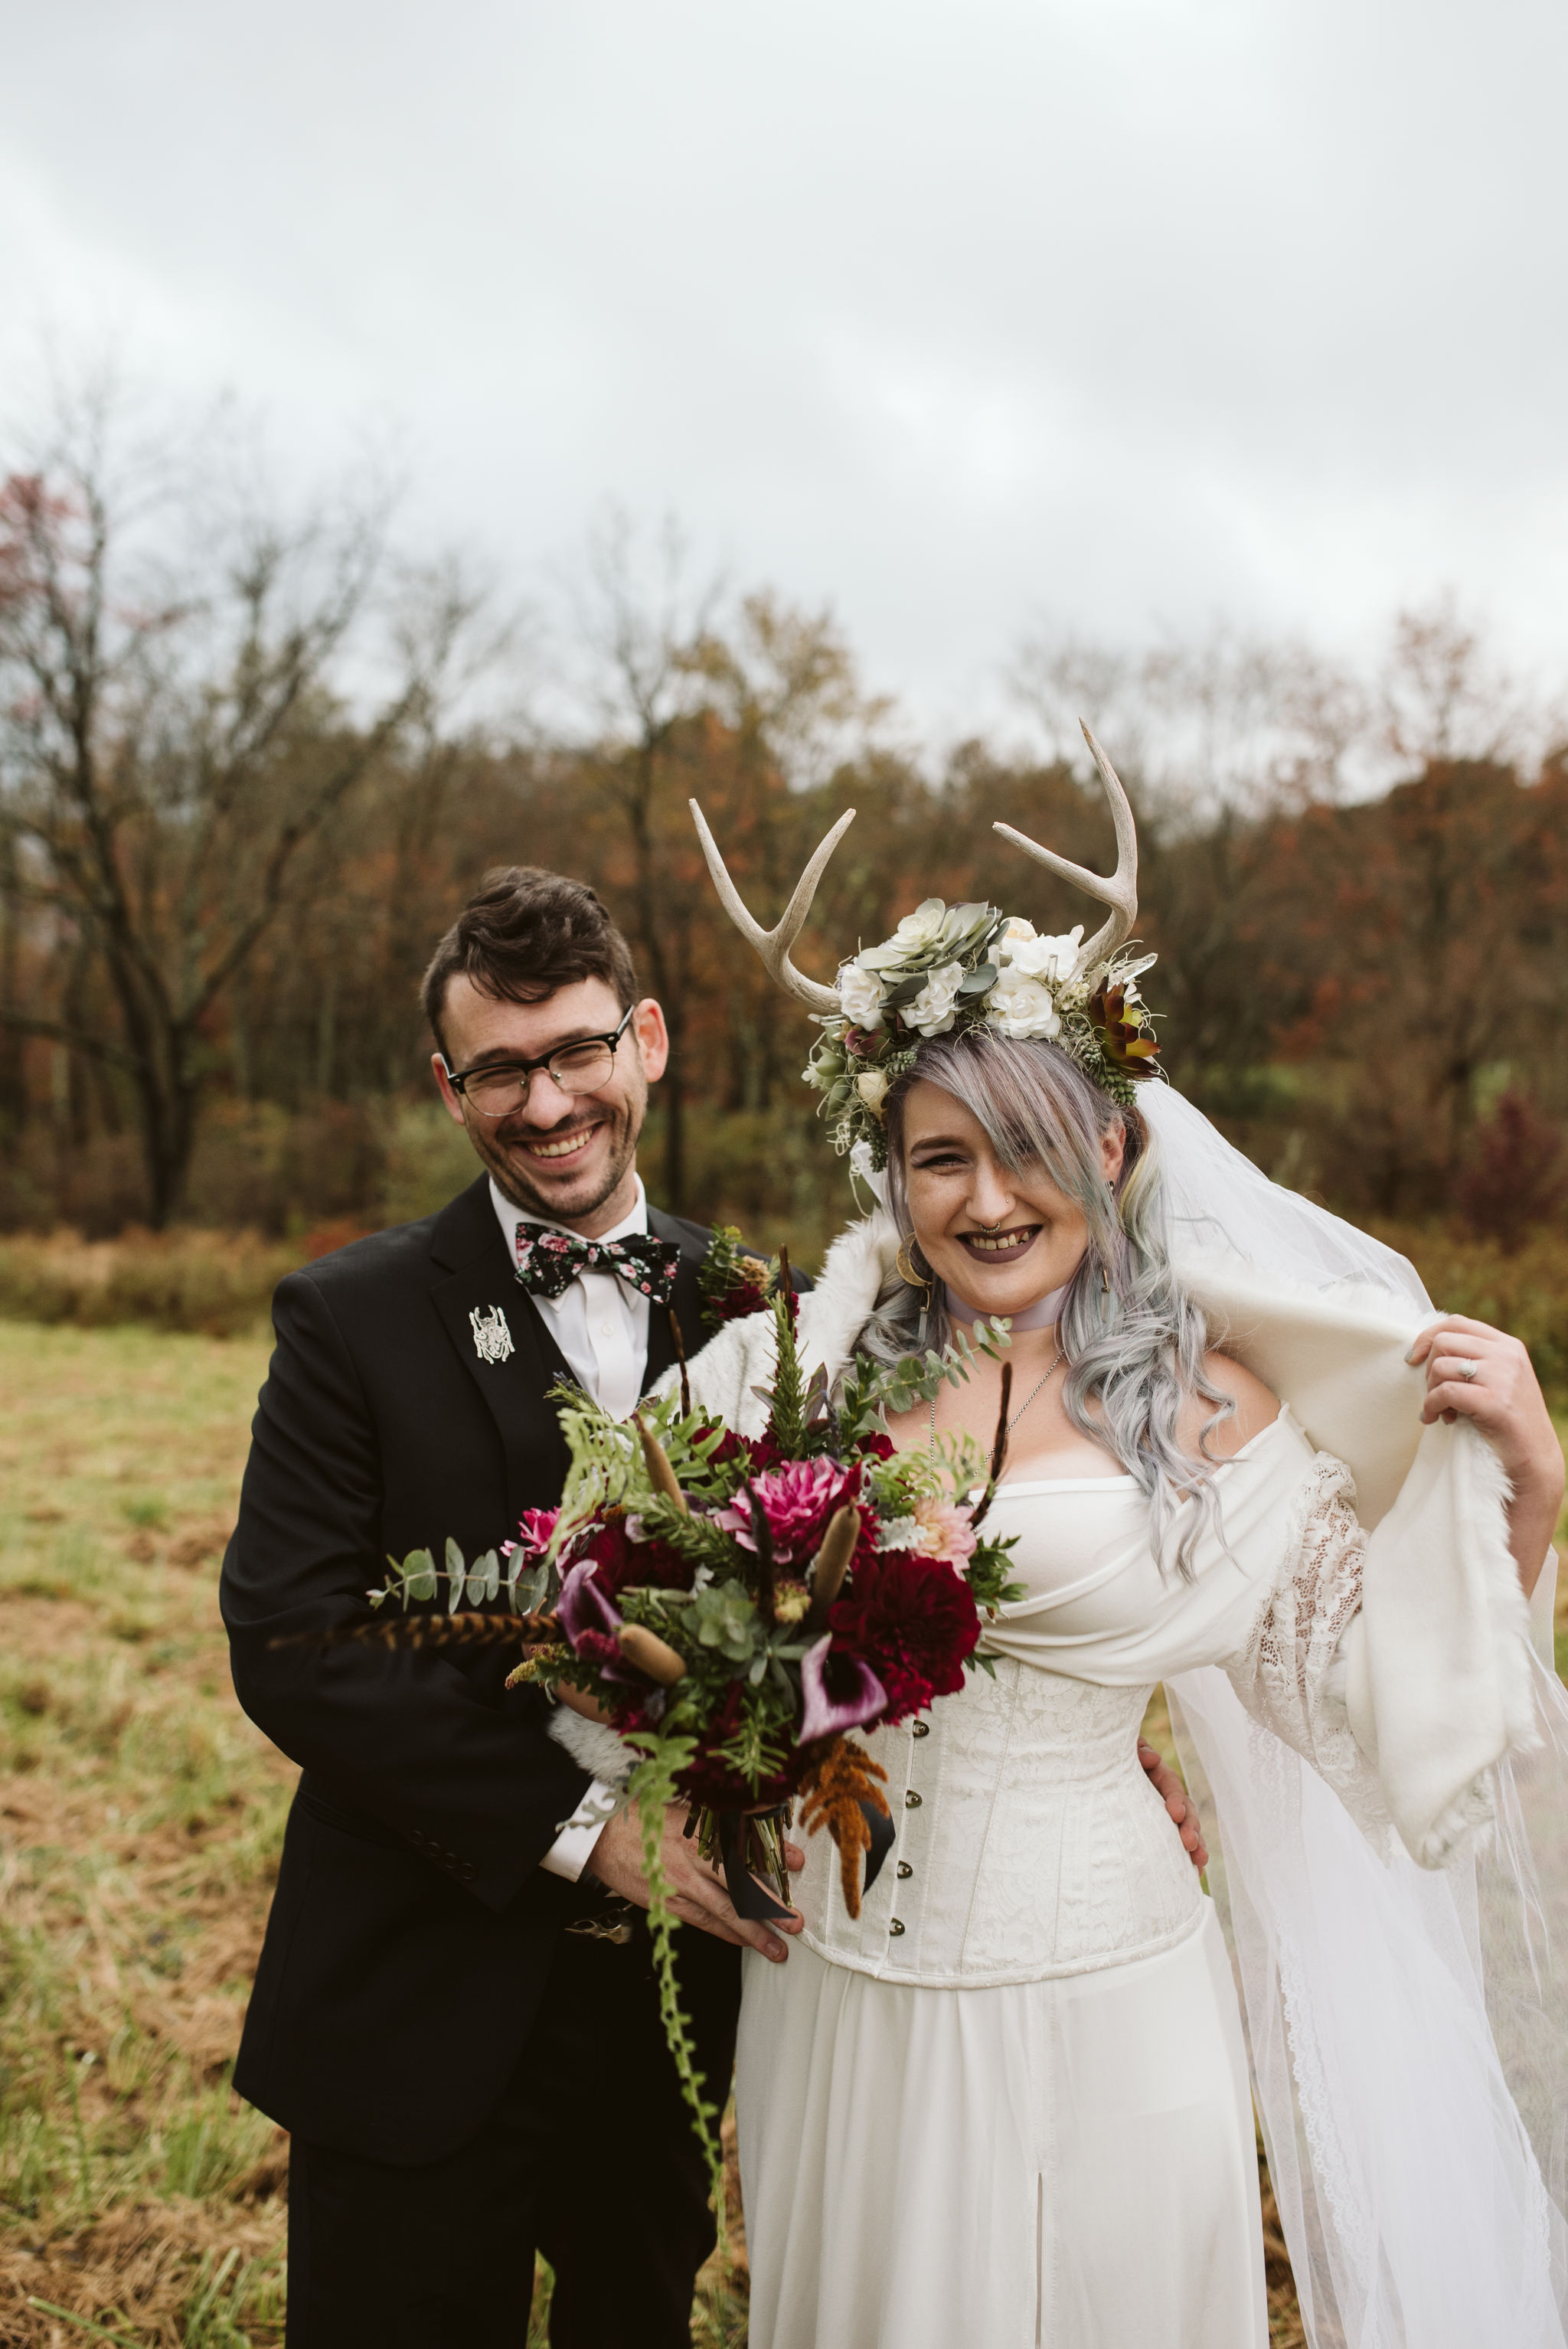  Maryland, Baltimore Wedding Photographer, Backyard Wedding, Fall, October, Dark Bohemian, Whimsical, Fun, Portrait of Bride and Groom, Flower Crown with Antlers, Fur Shawl, The Modest Florist 